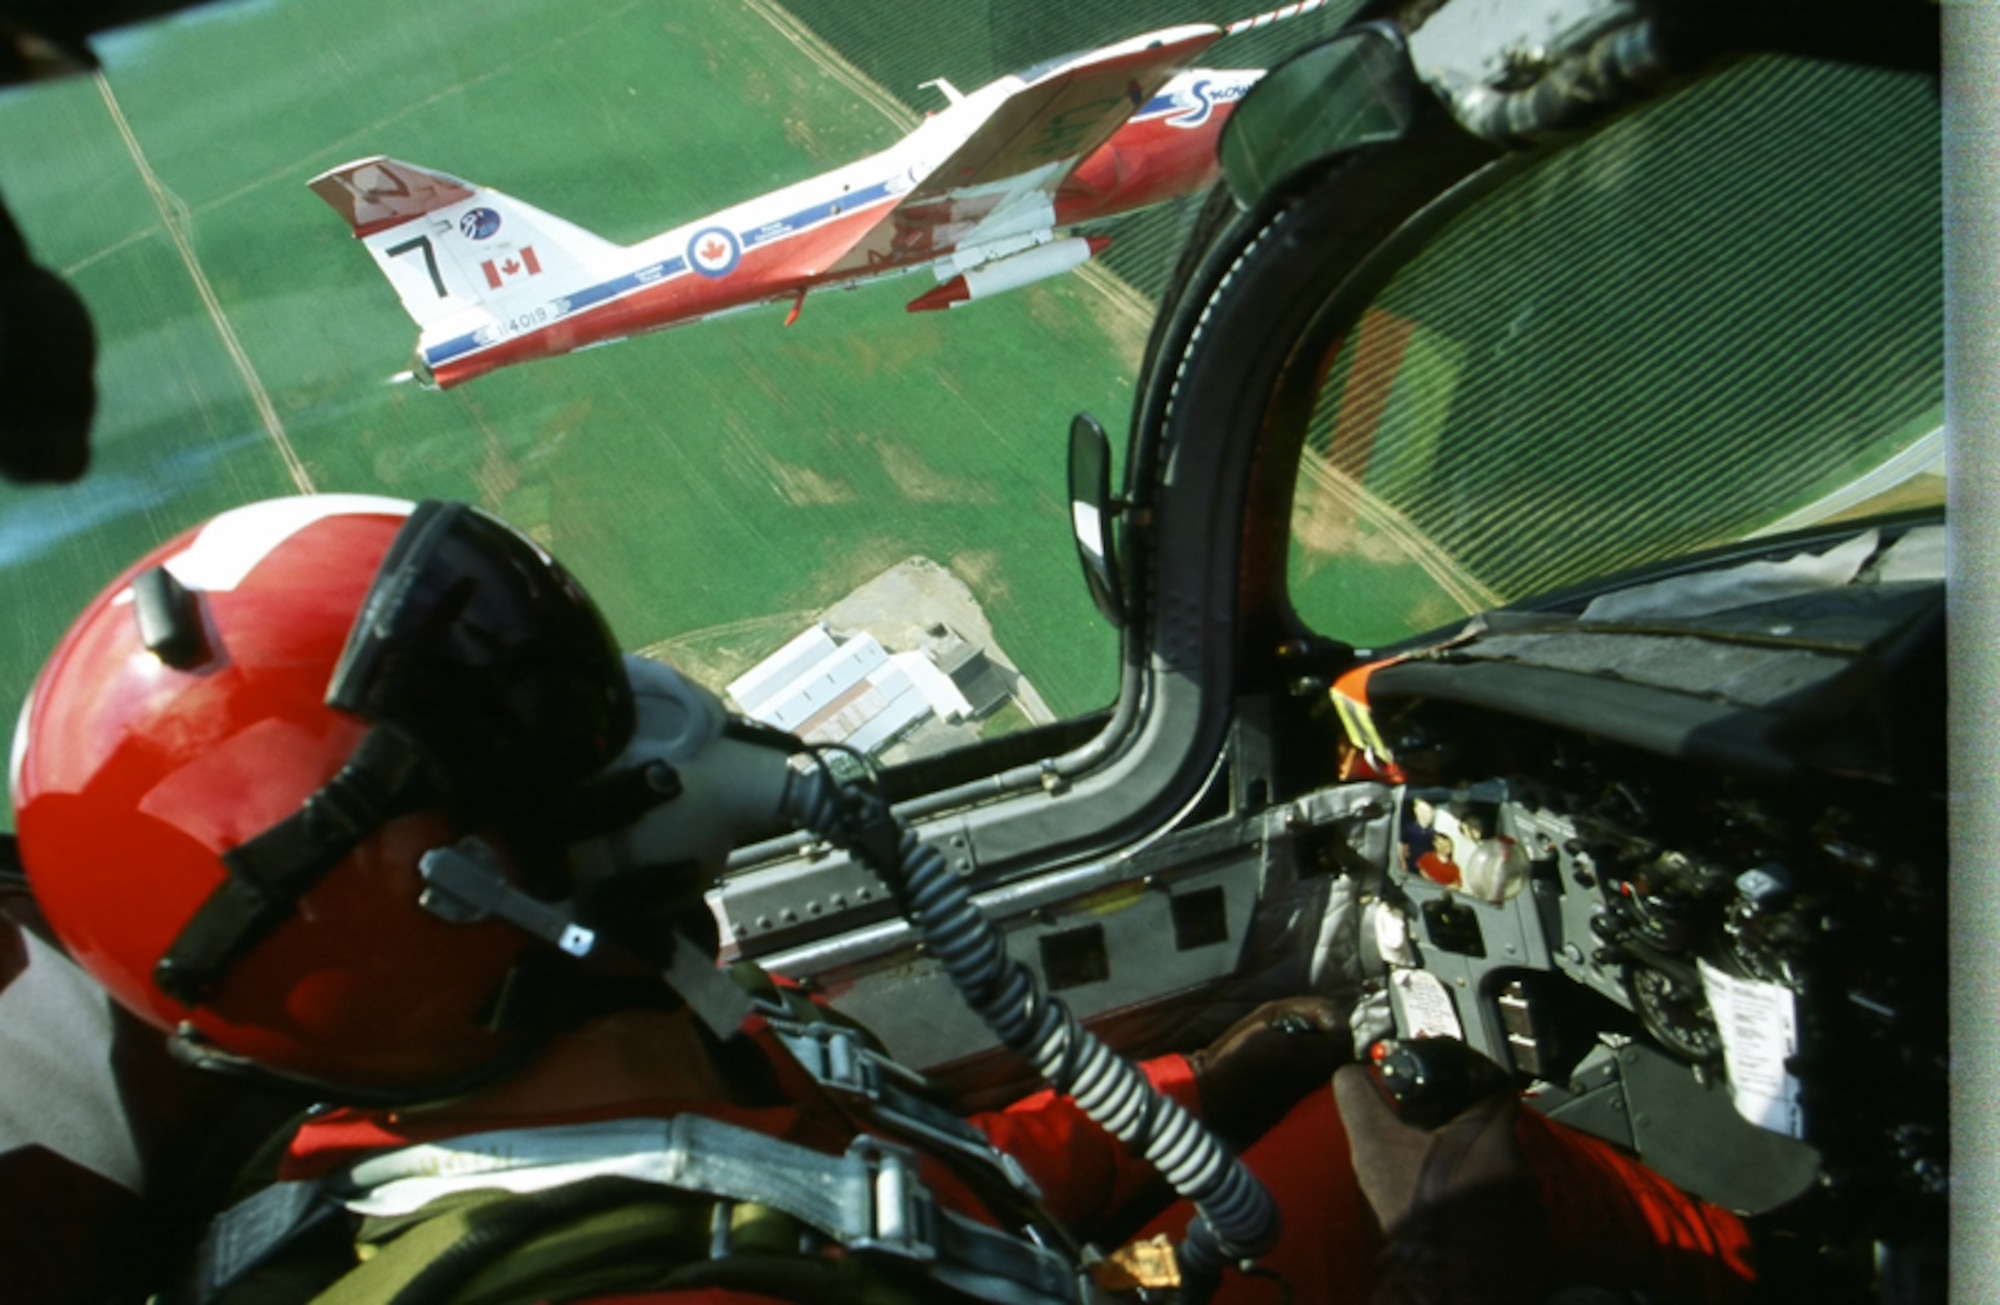 A view from inside the cockpit of a Snowbirds CT-114 Tutor jet. The Snowbirds
have flow the Tutor jet since 1971. (Photo Courtesy of the Canadian Snowbirds)